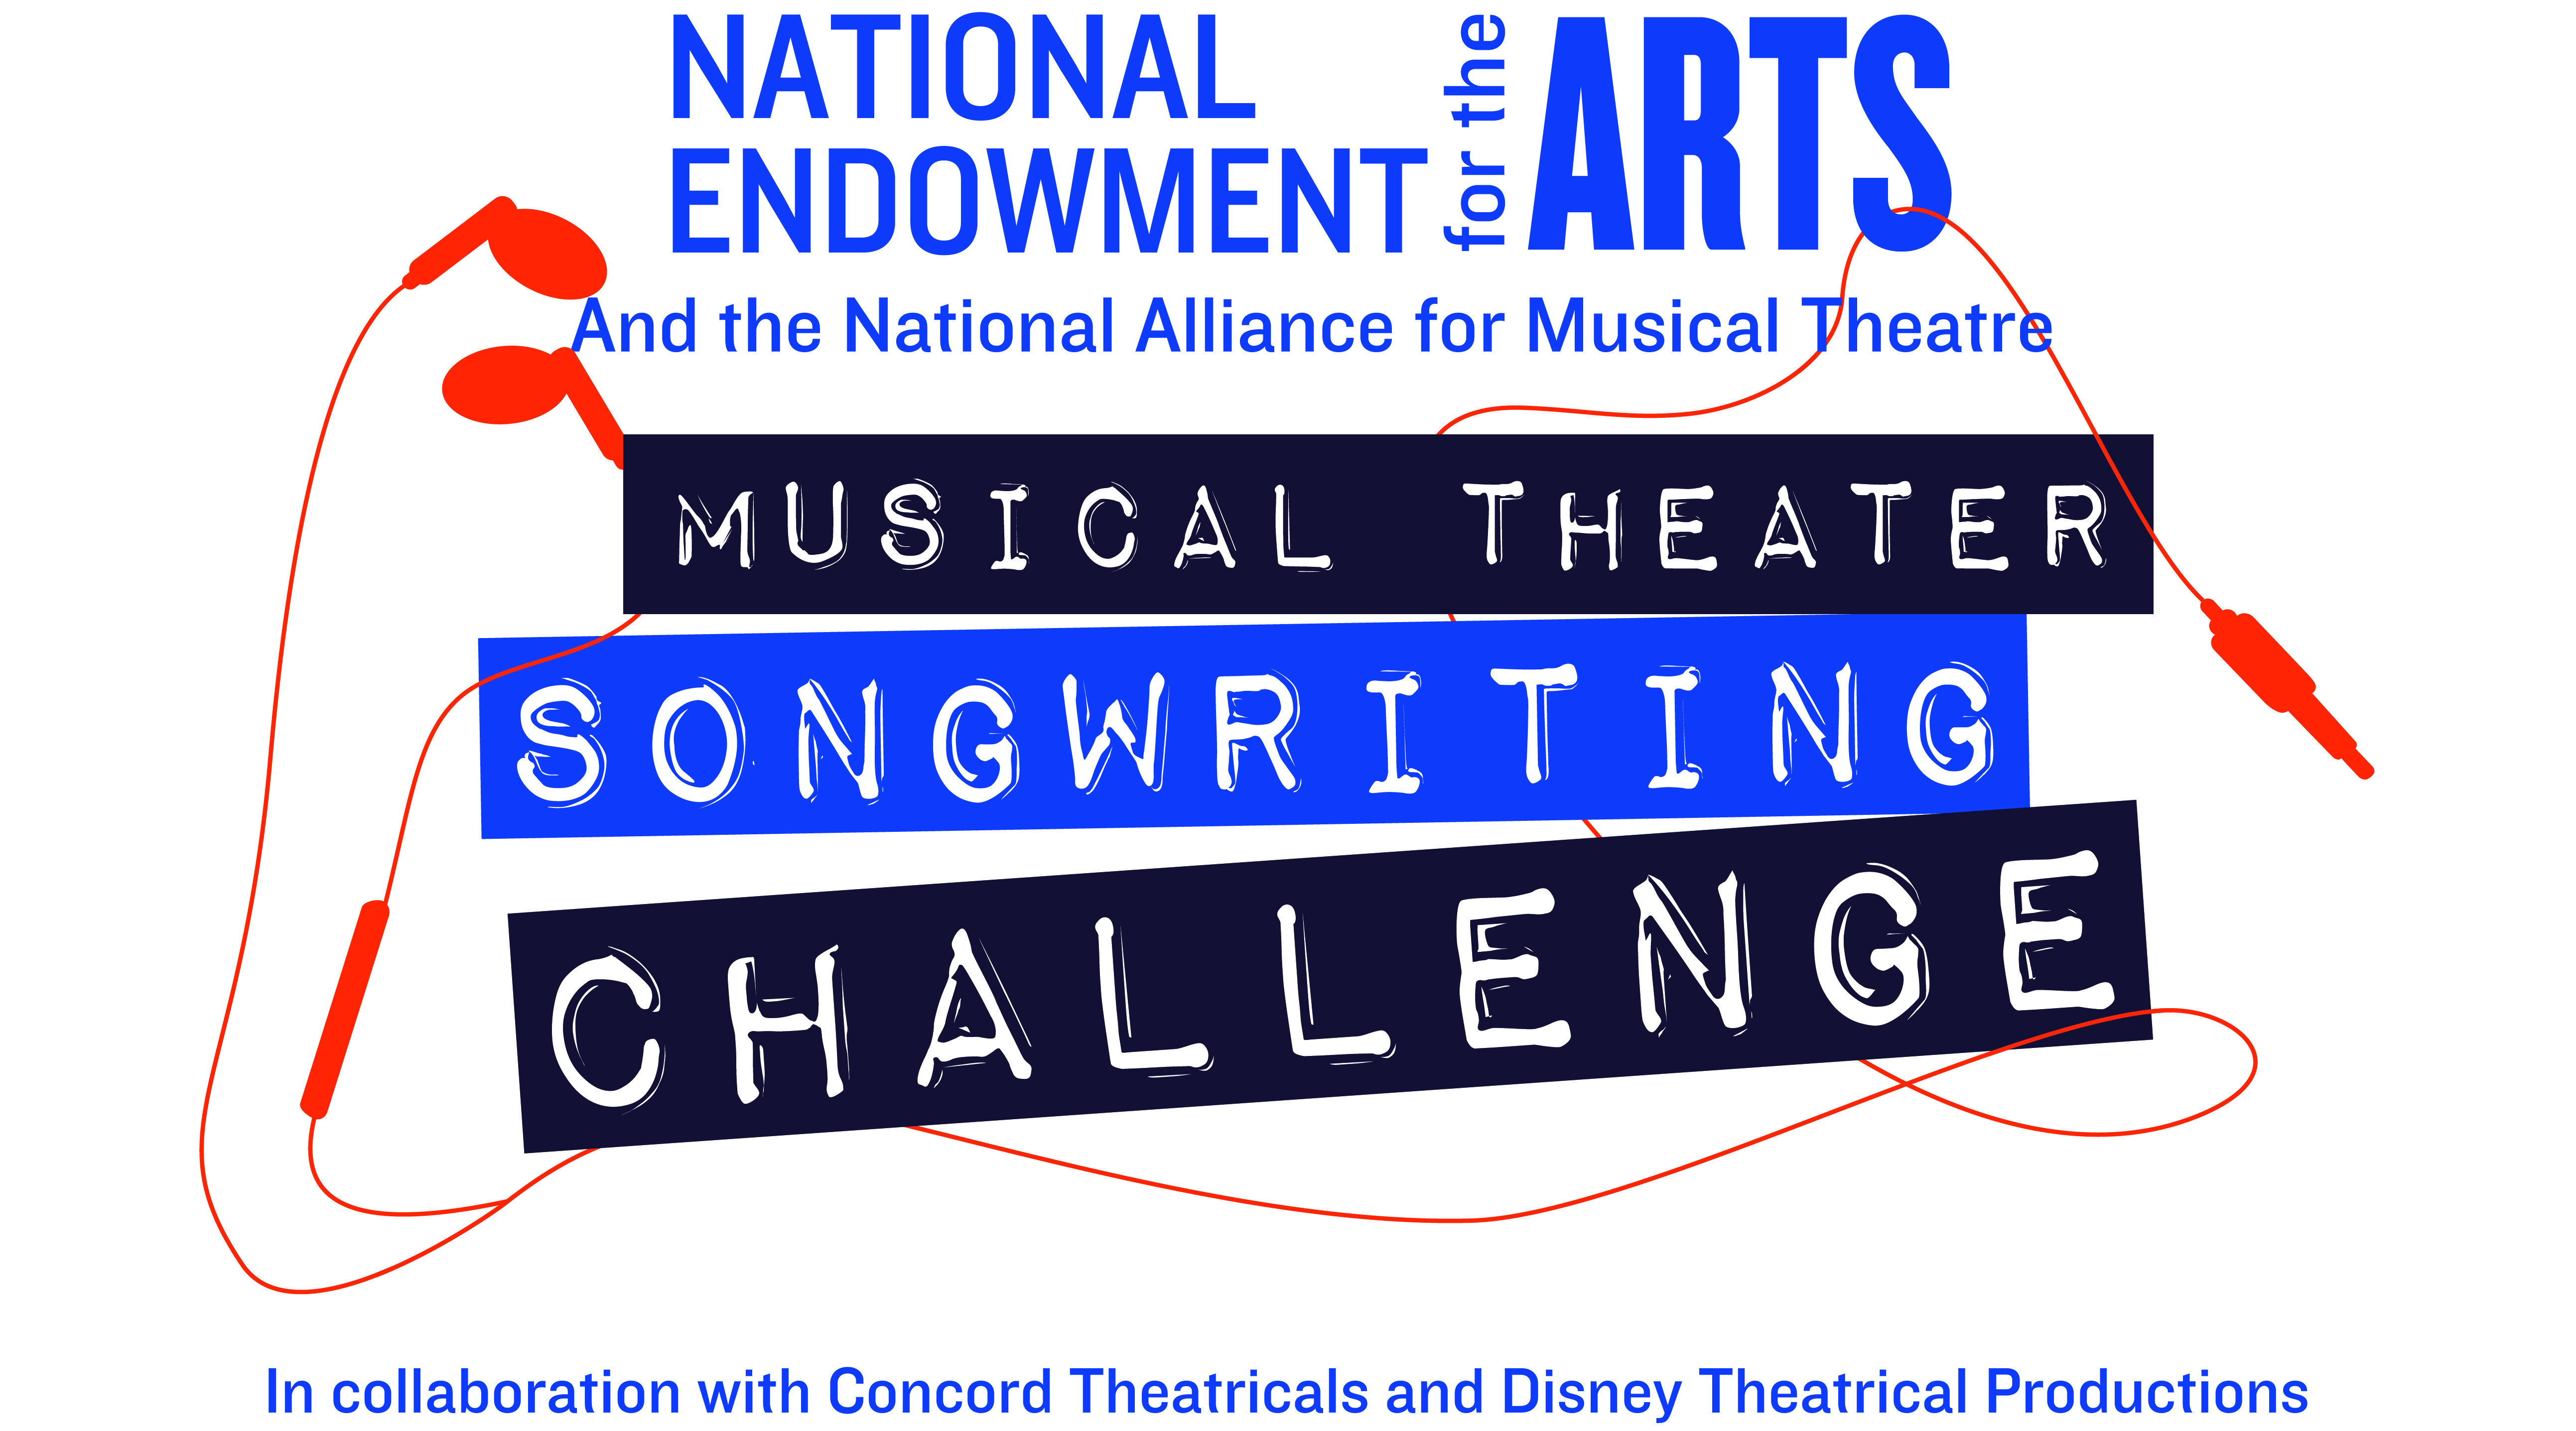 The Musical Theater Songwriting Challenge, presented by the National Endowment for the Arts (NEA) in partnership with the National Alliance for Musical Theatre (NAMT), is an opportunity for high school students all across the country to develop and showcase musical compositions that could be part of a musical theater production.